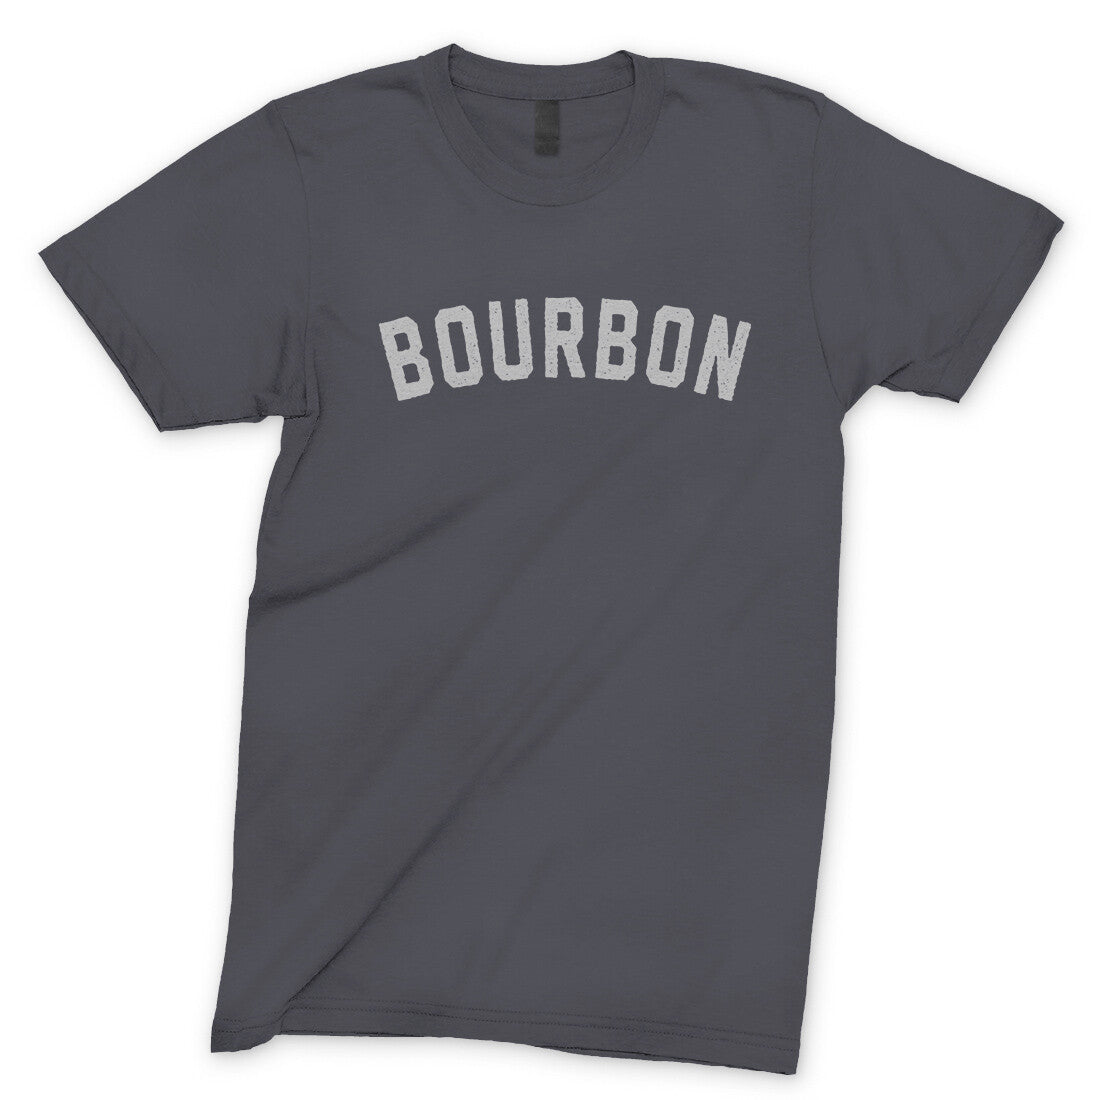 Bourbon in Charcoal Color